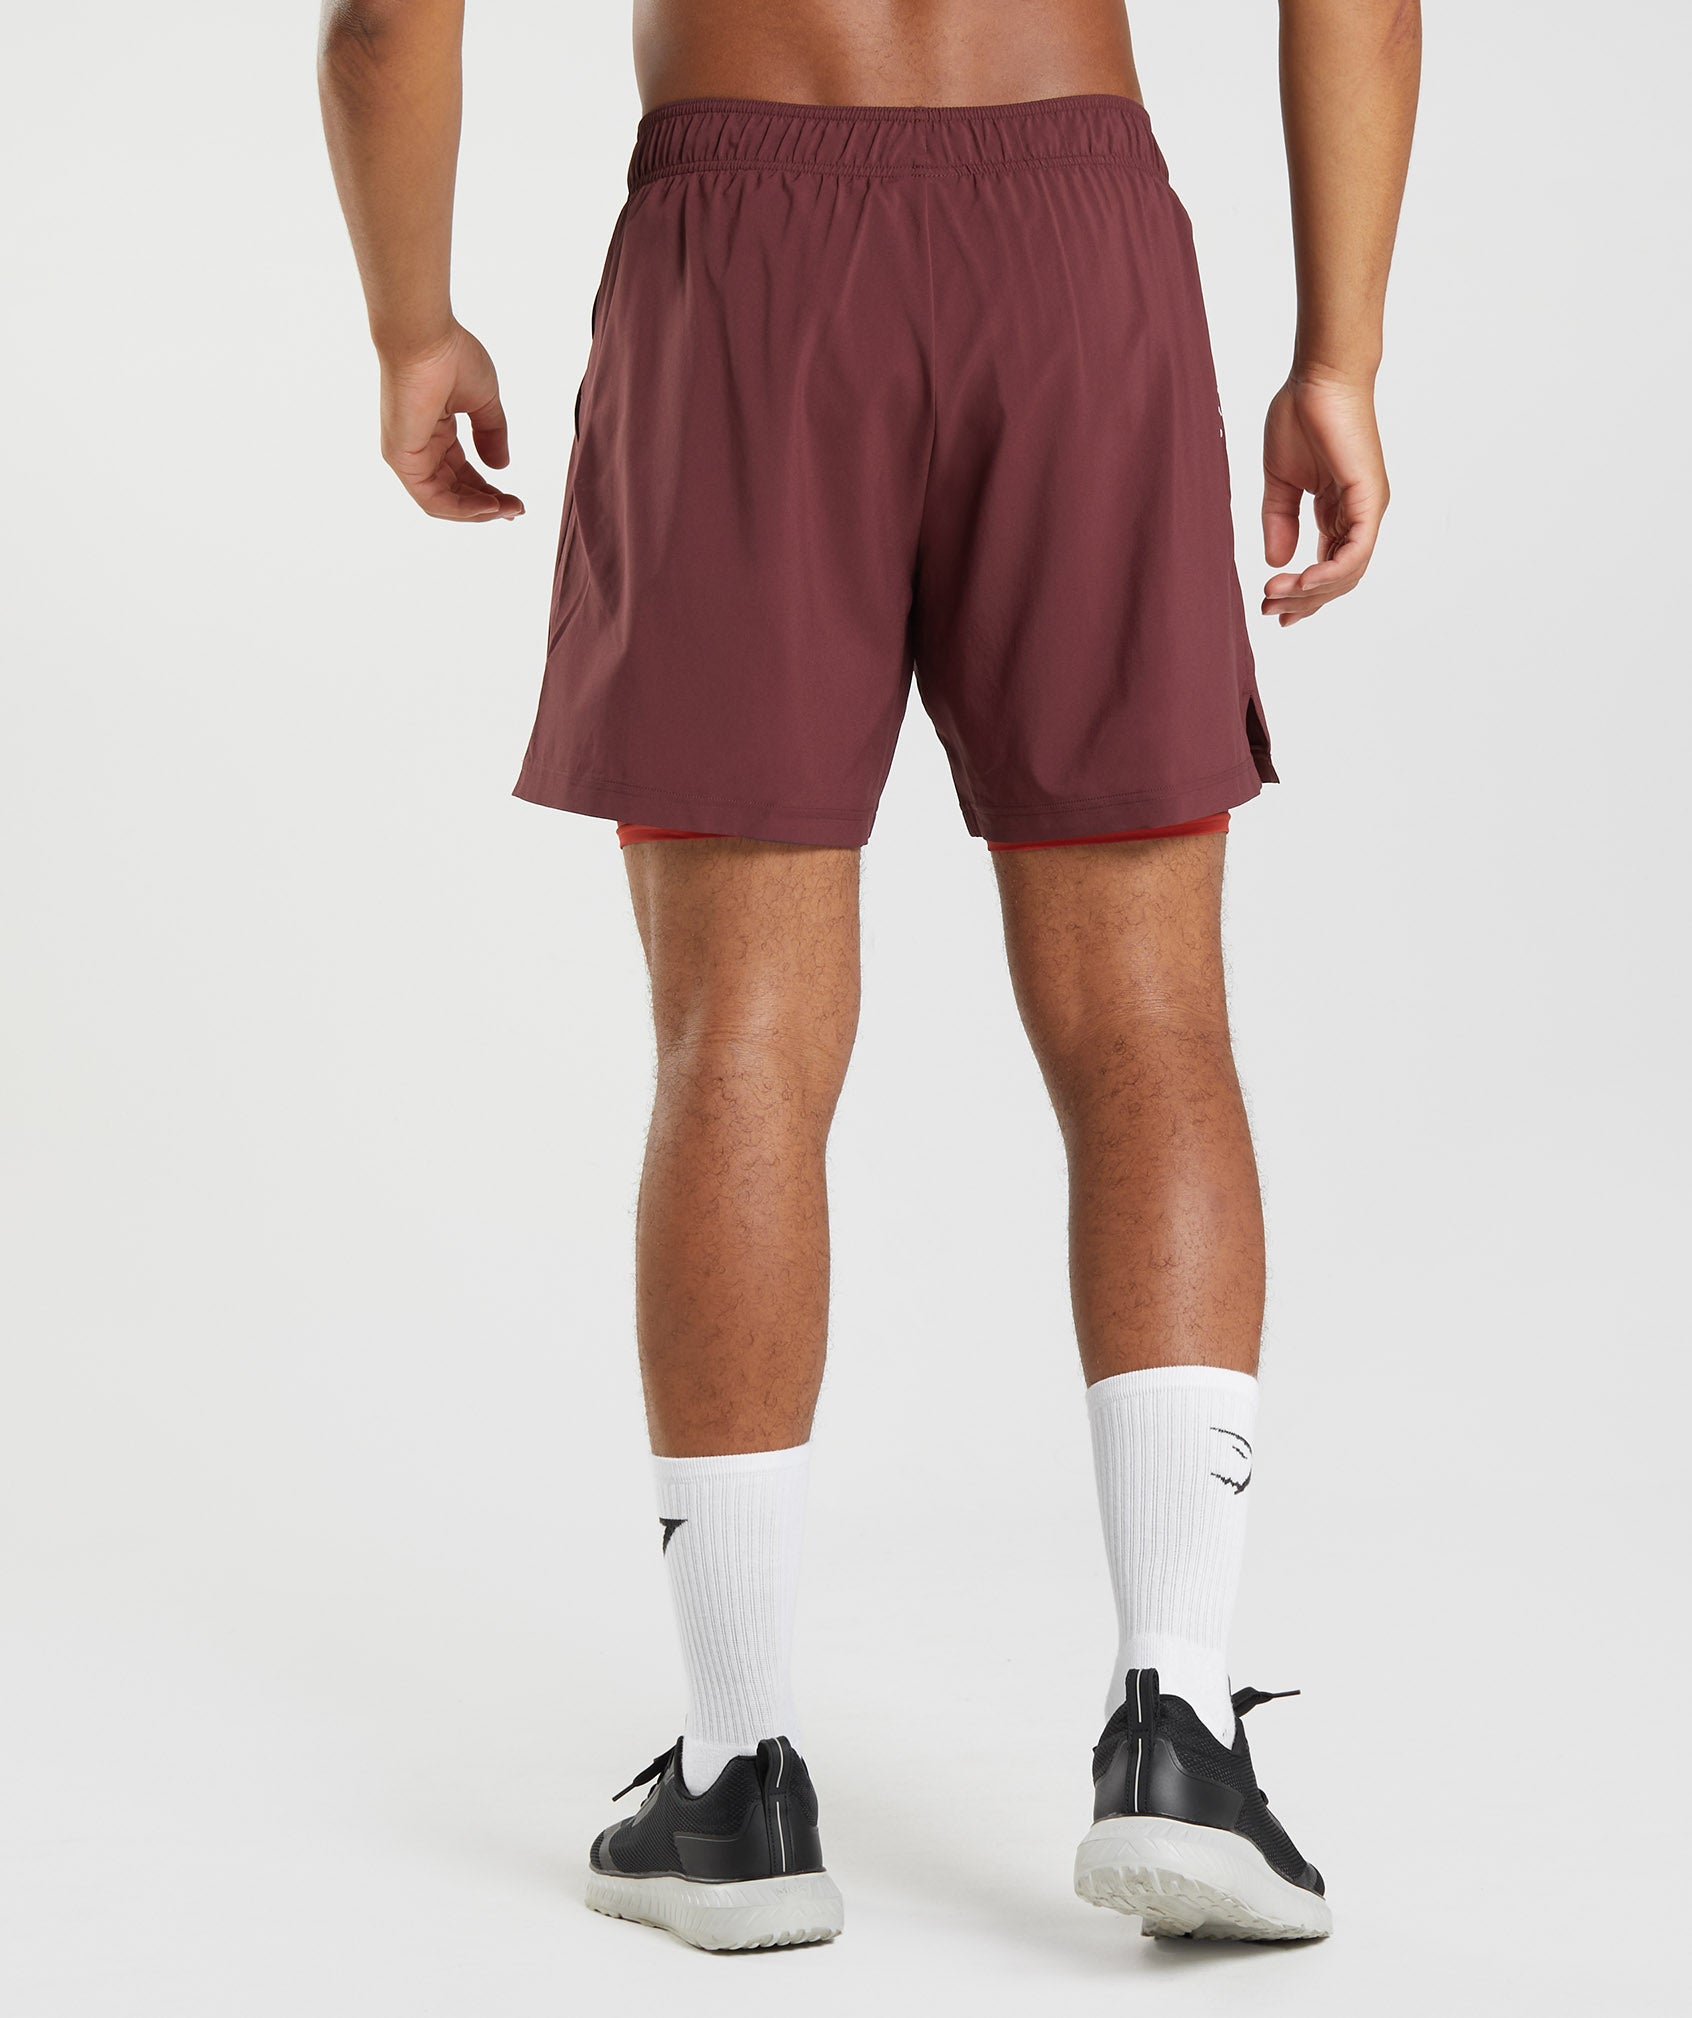 Sport 7" 2 In 1 Shorts in Baked Maroon/Salsa Red